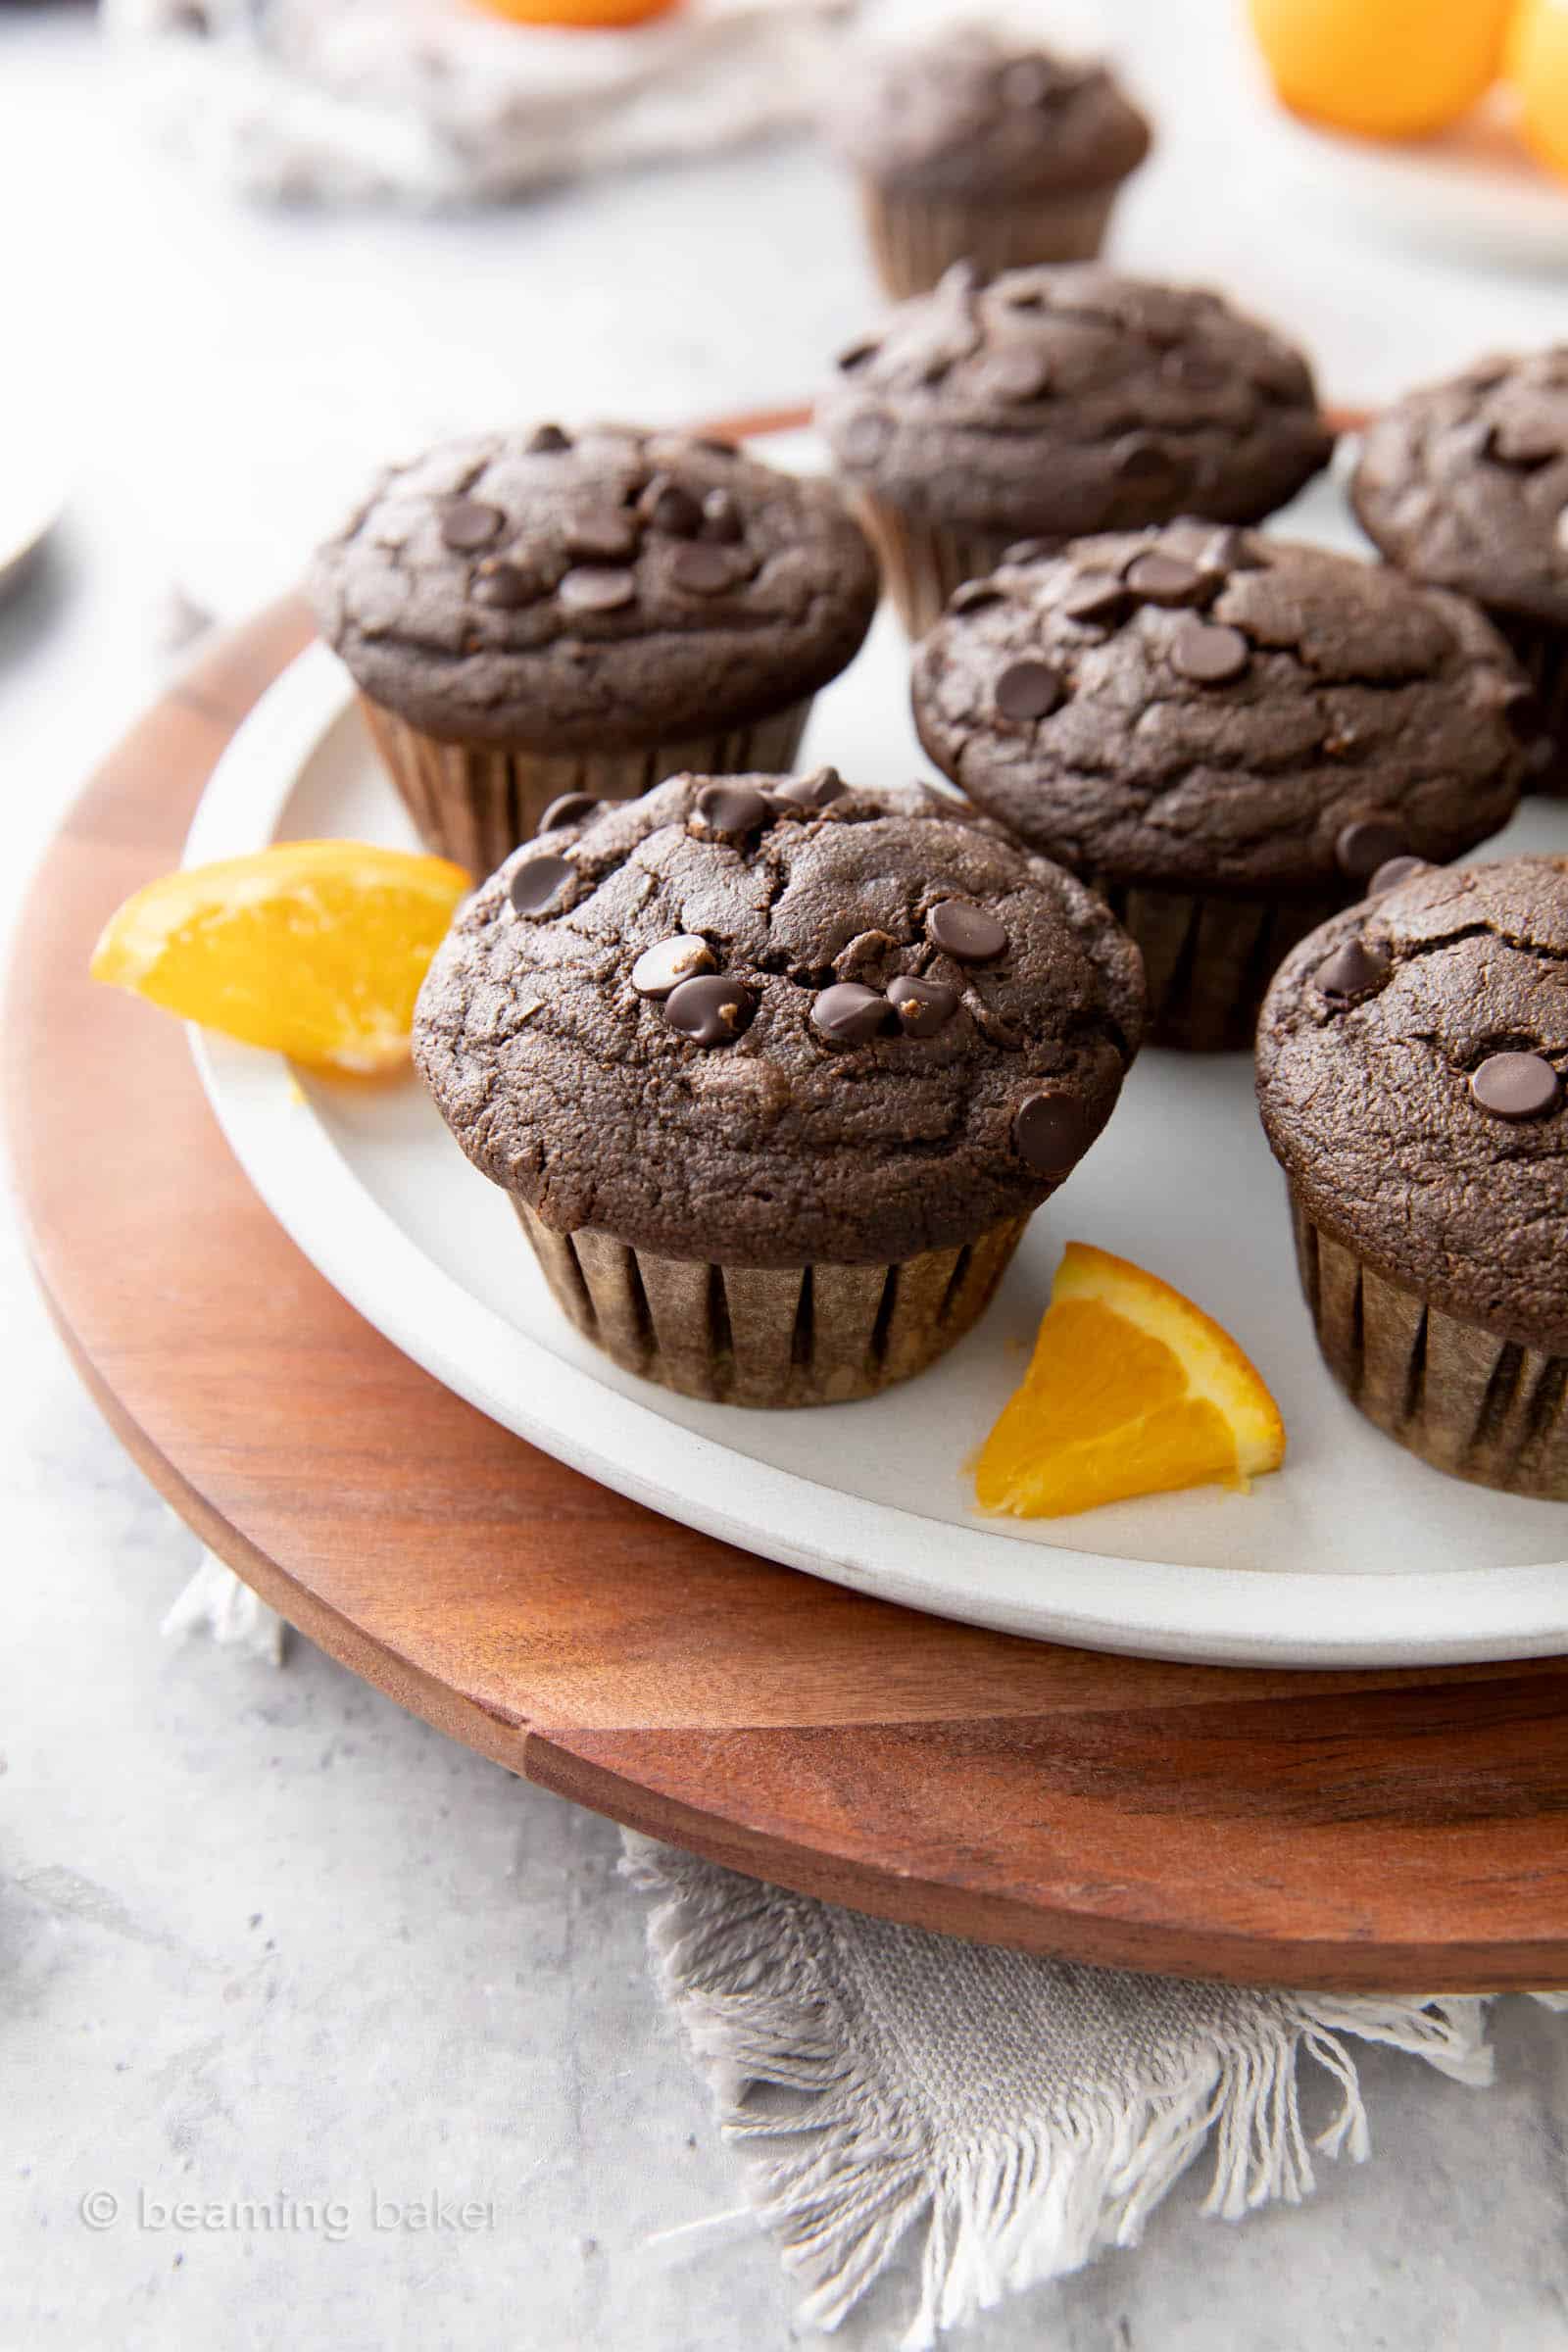 Many vegan chocolate orange muffins served on a plate and serving tray with a kitchen towel and fresh oranges